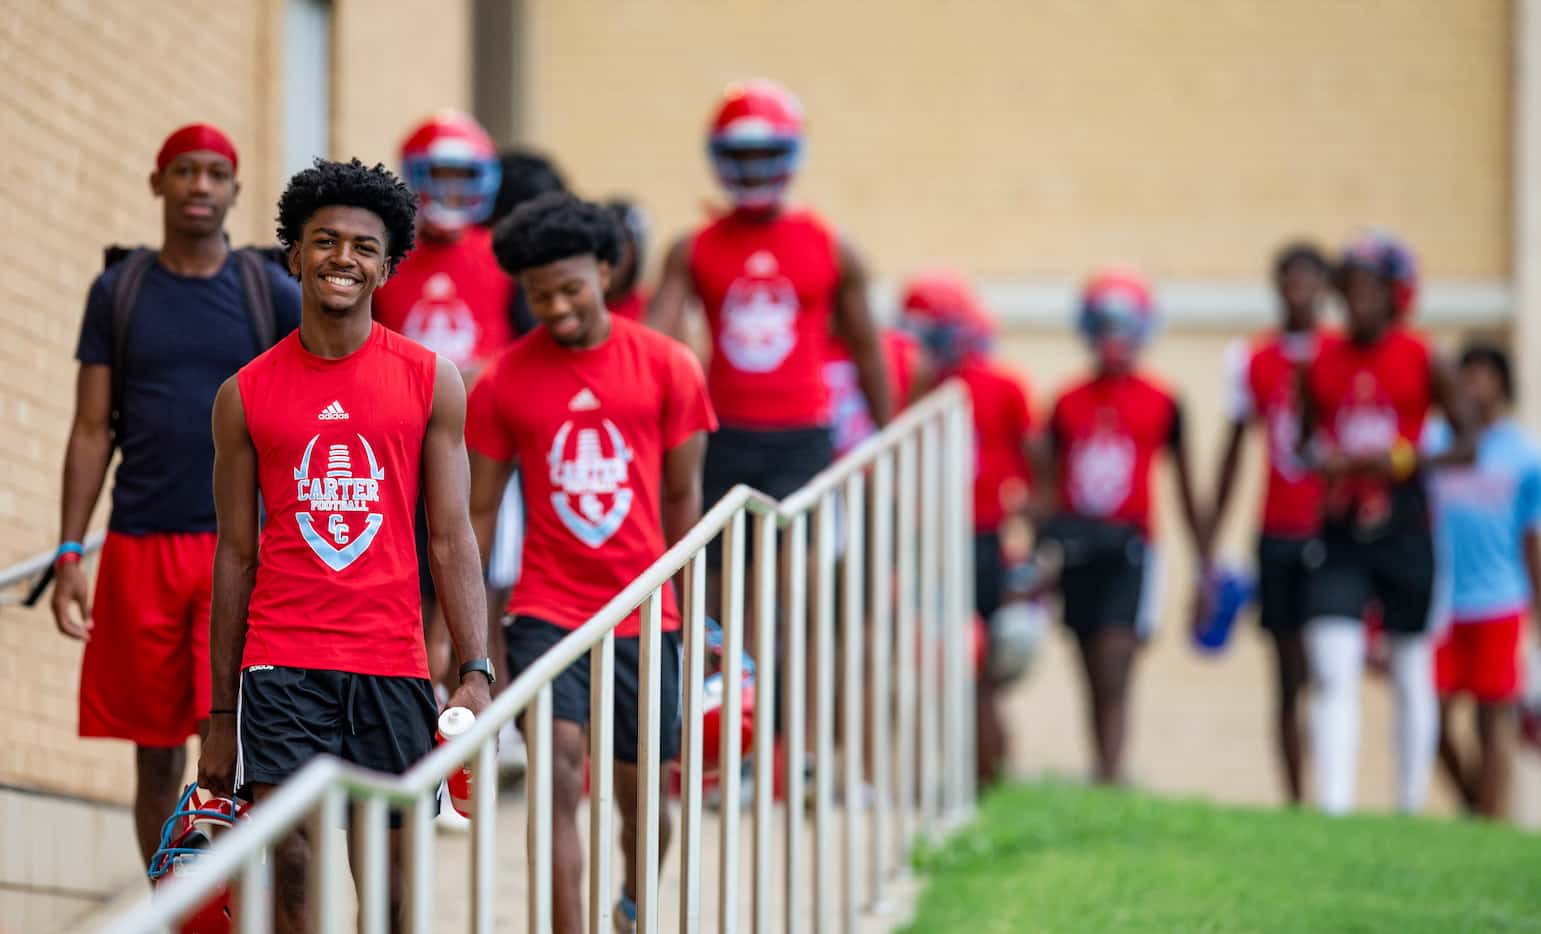 Carter senior quarterback William Young, left, leads his team to the practice field for the...